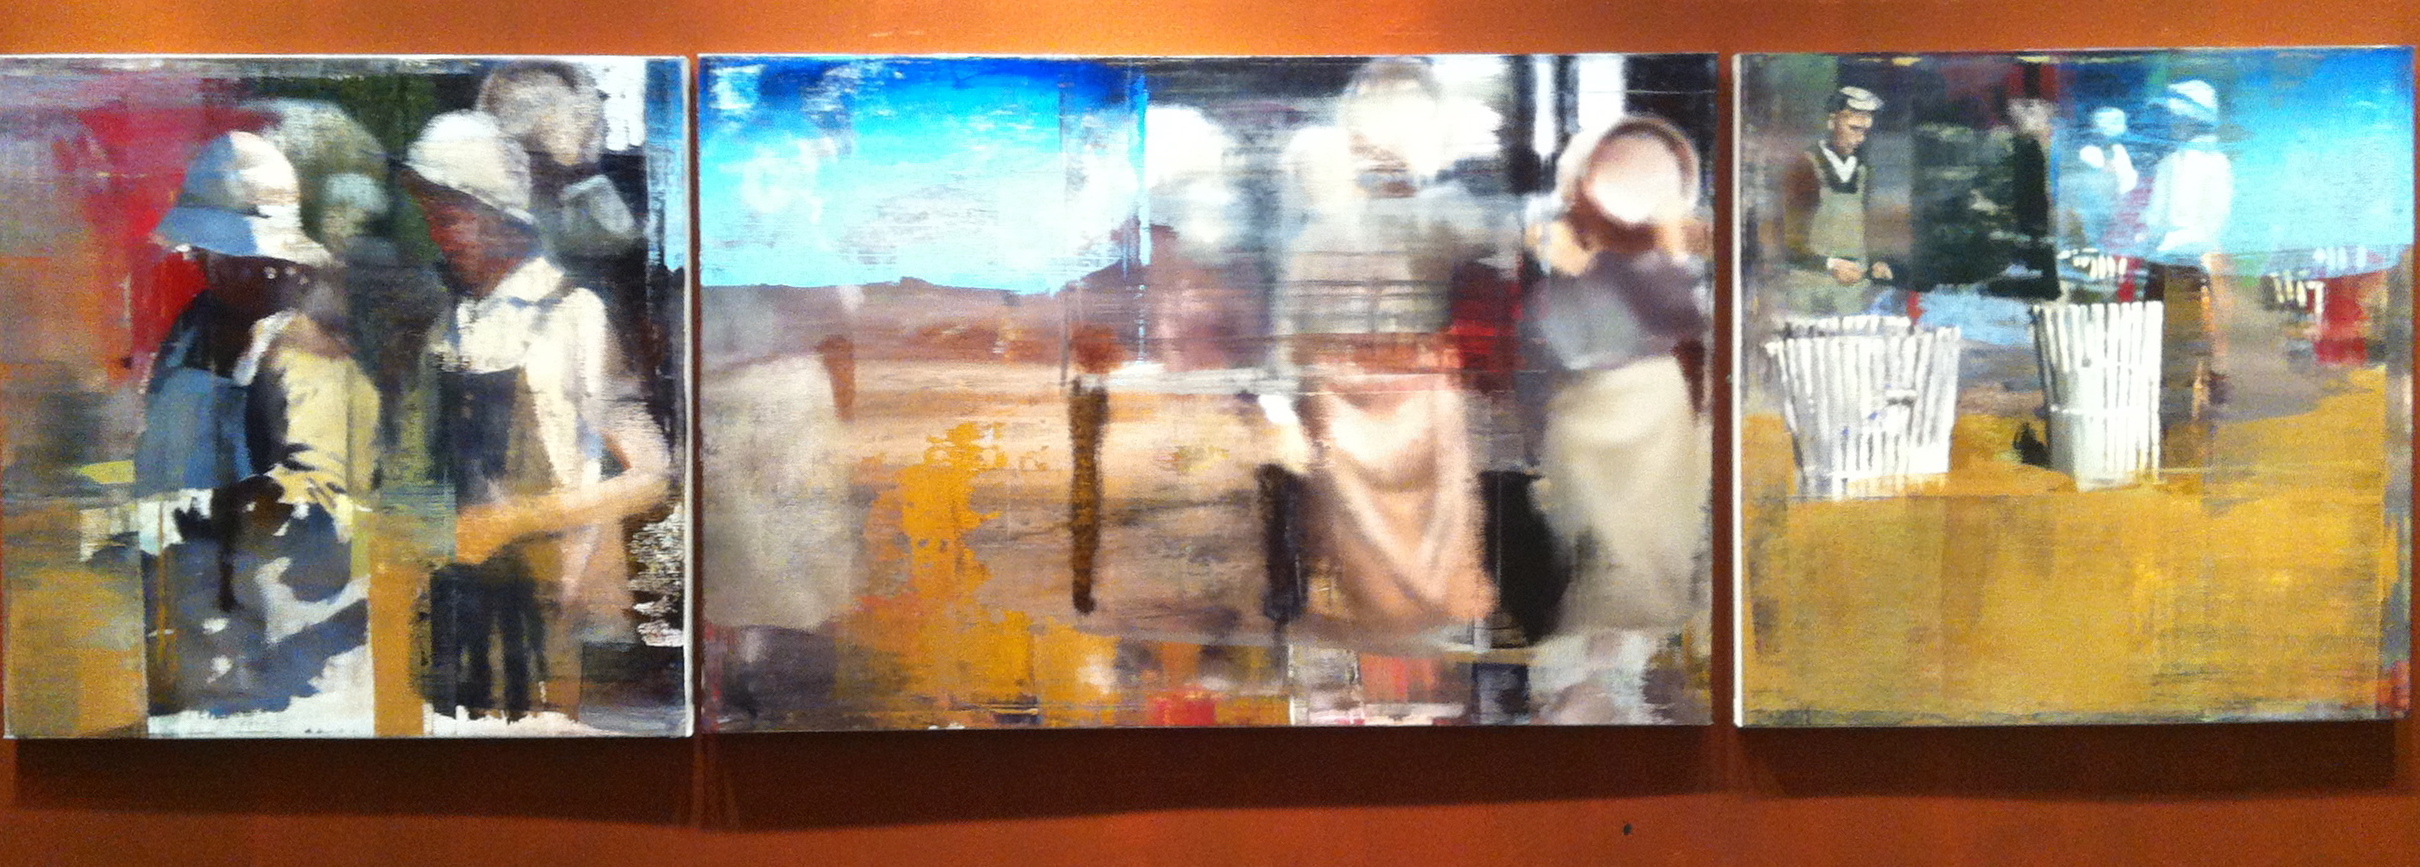 10. Moving the Barrels, Oil on Linen on Panel, 2013, 48” X 168”